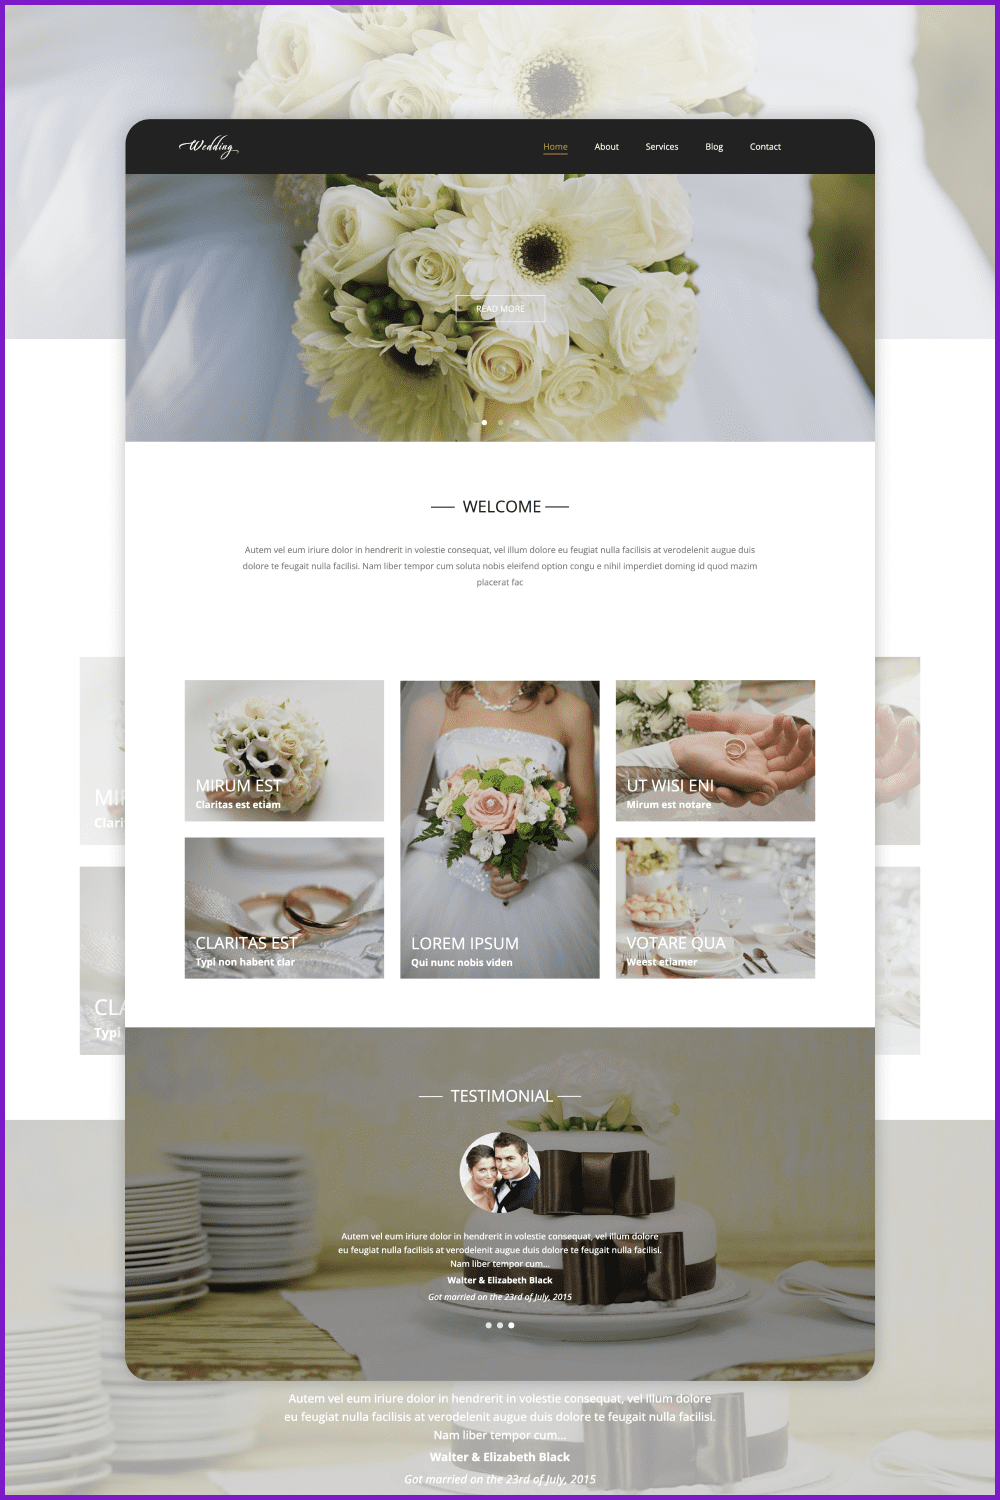 Screenshot of the site page with photos of wedding bouquets and rings.